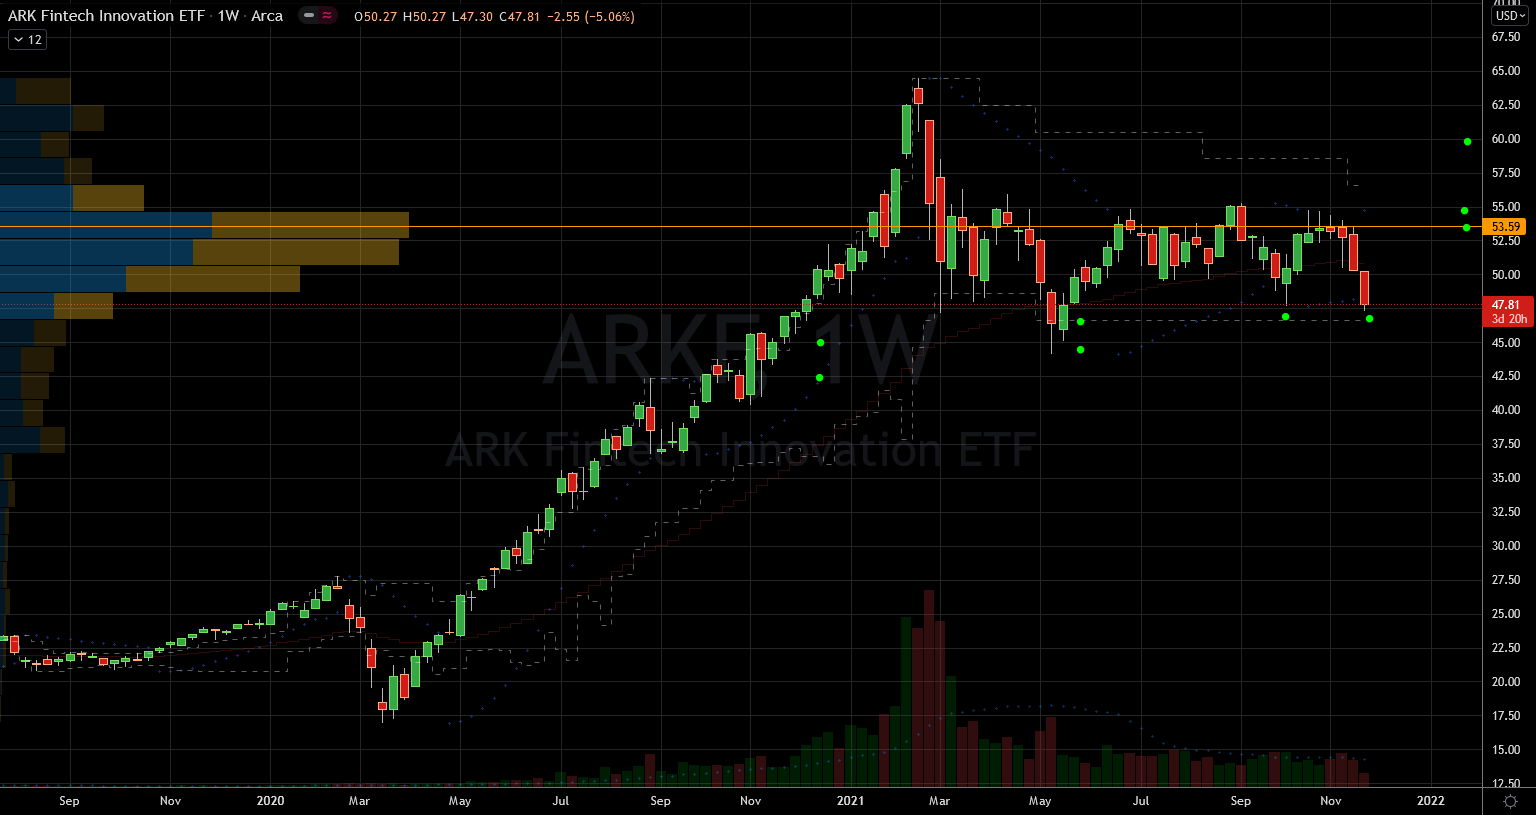 Stocks to Buy: ARK Fintech Innovation ETF (ARKF) Stock Chart Showing Potential Support